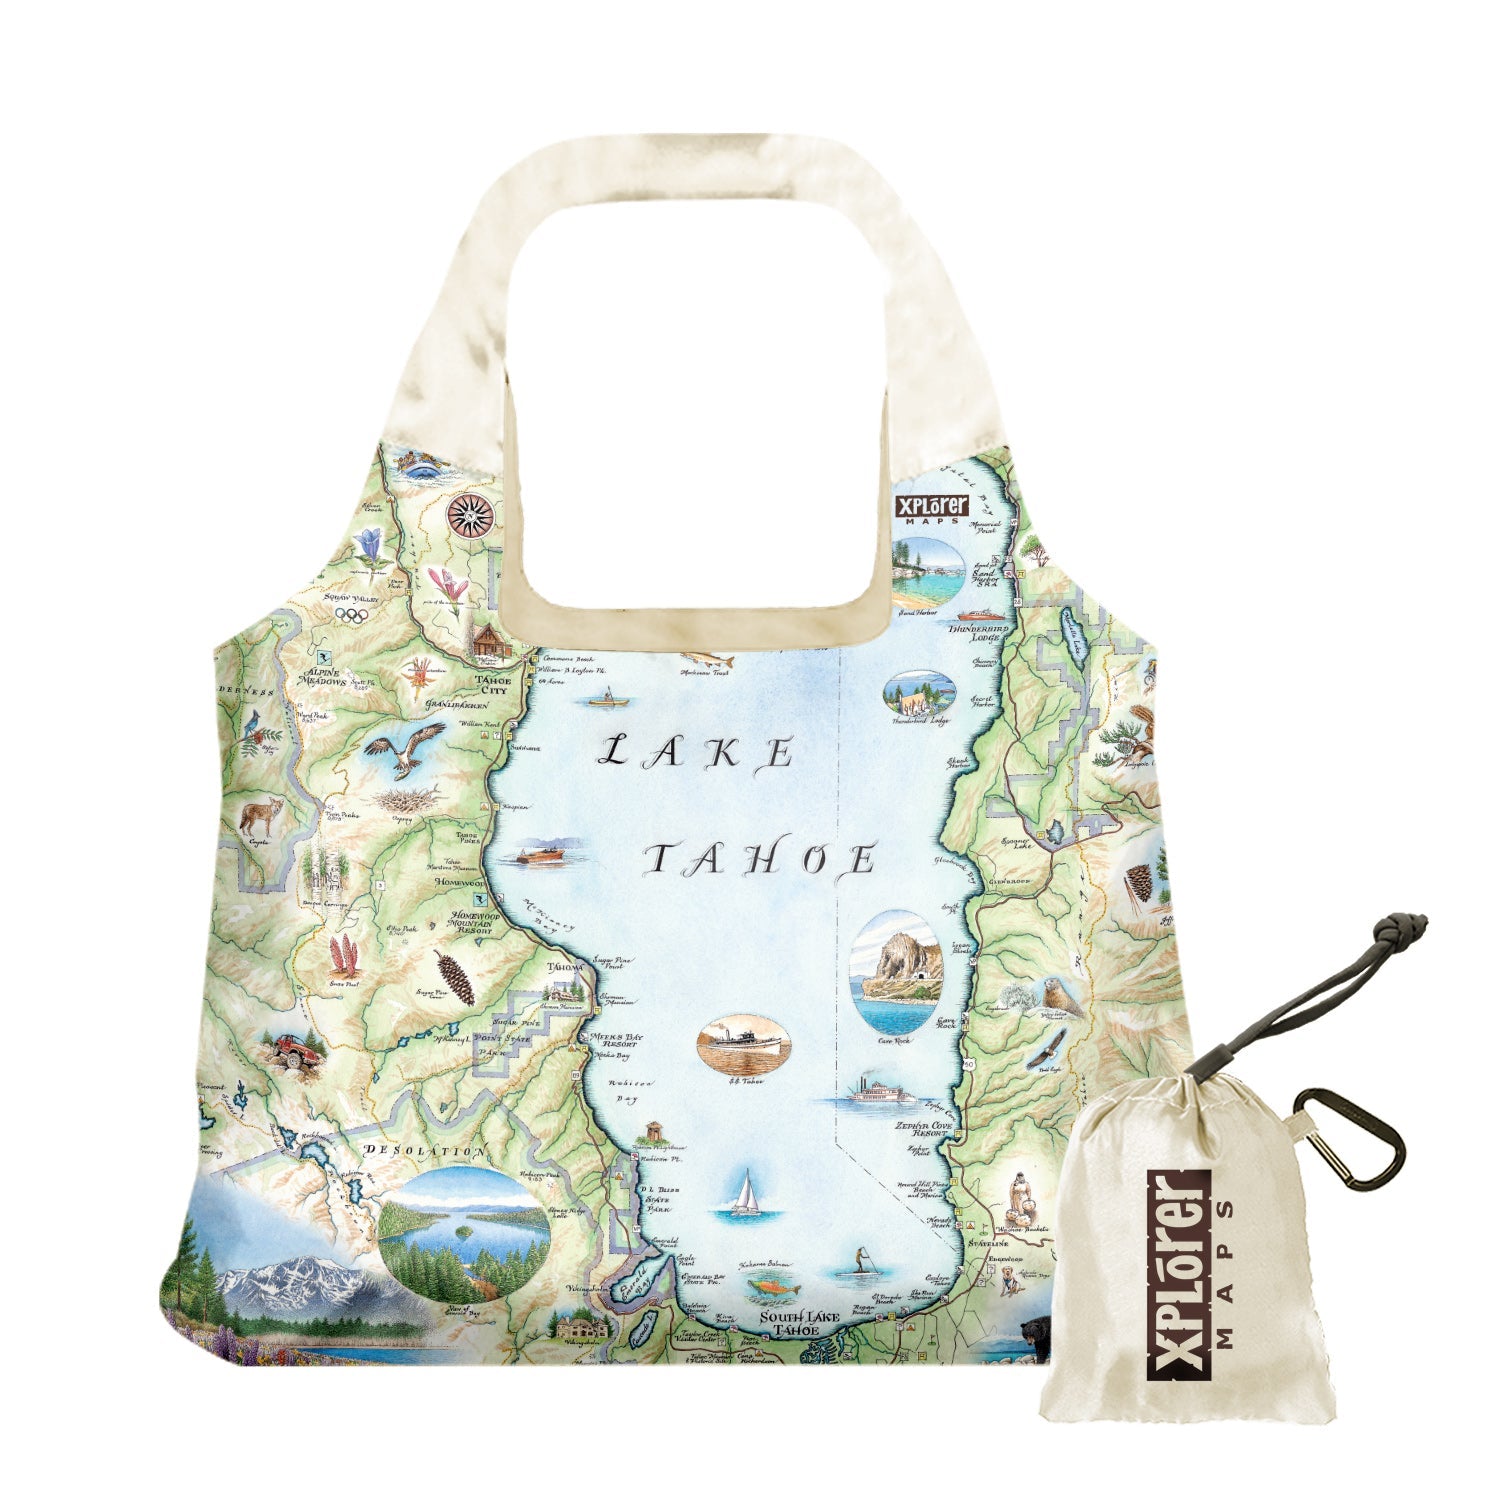 Lake Tahoe Pouch Tote Bags by Xplorer Maps. The map features the land's topography along with the area's flora and fauna, such as Emerald Bay, Cove Rock, Thunderbird Lodge, and Cal Neva Lodge & Resort.